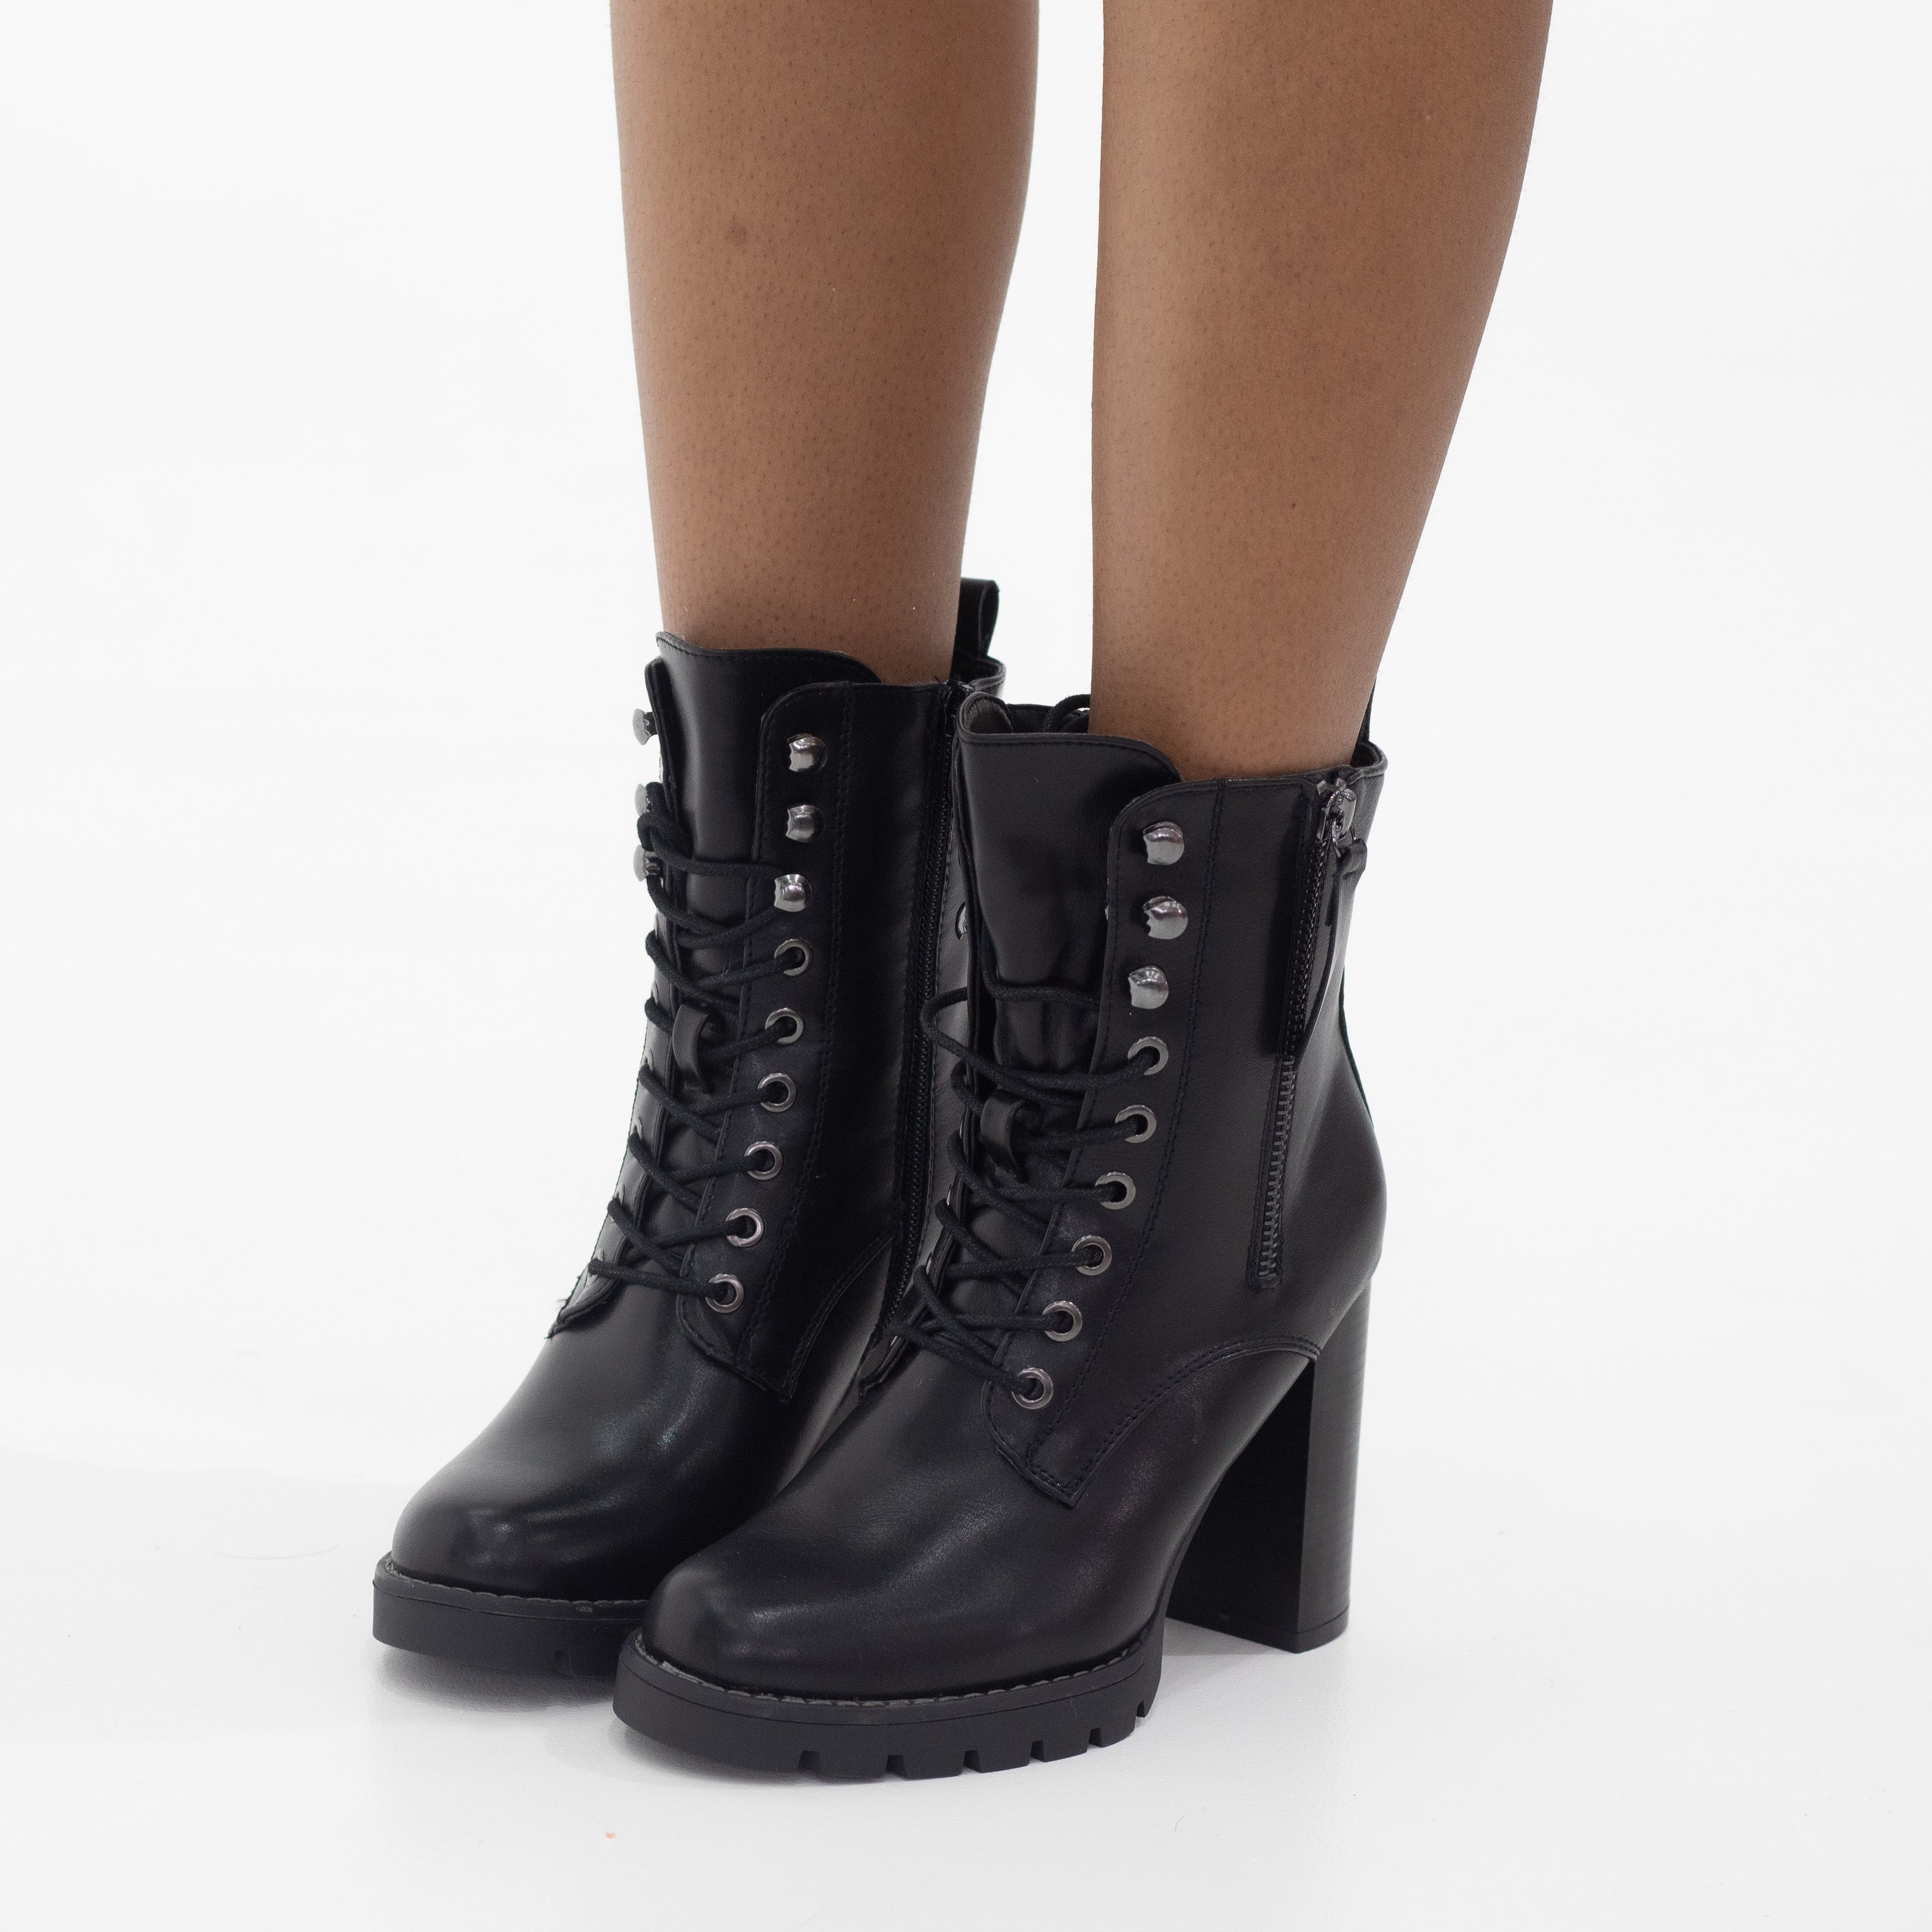 Black 10cm heel lace up ankle boot opposite